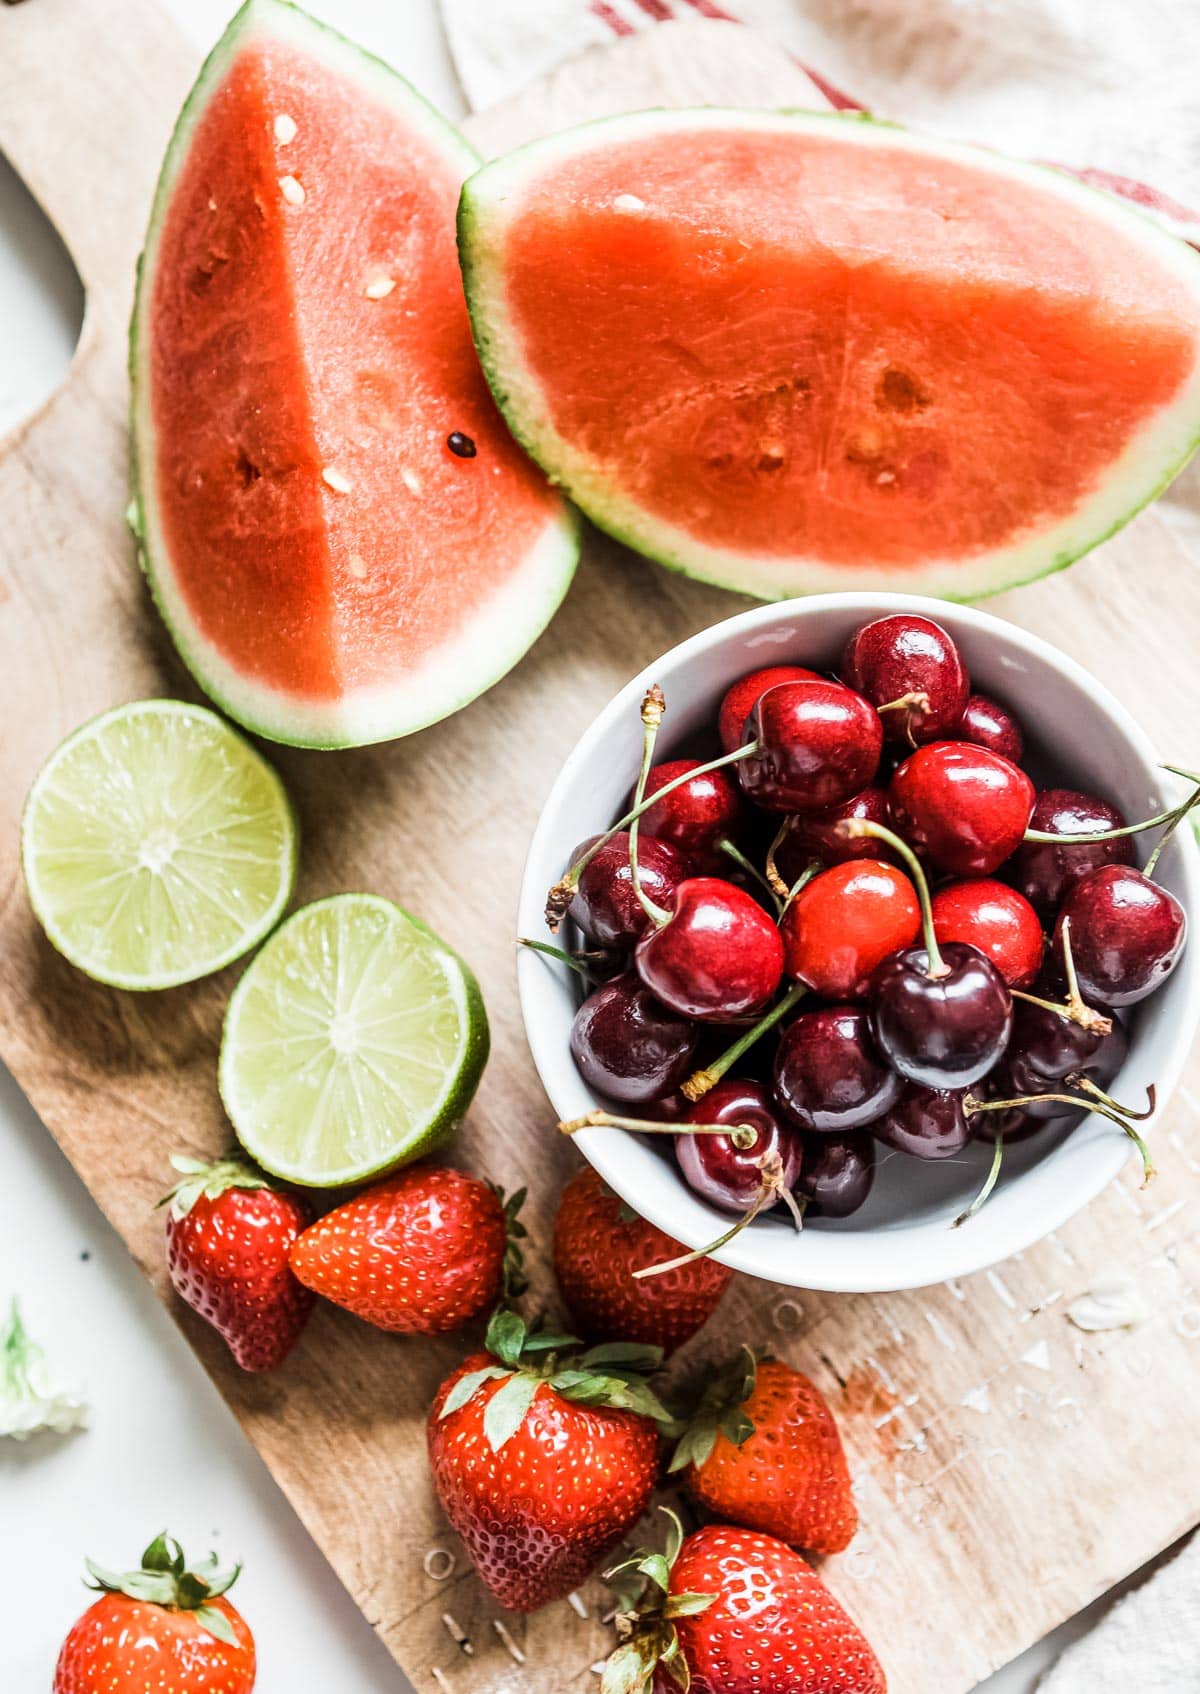 ingredients for a delicious summer smoothie on a wooden cutting board including watermelon, lime, cherries and strawberries.